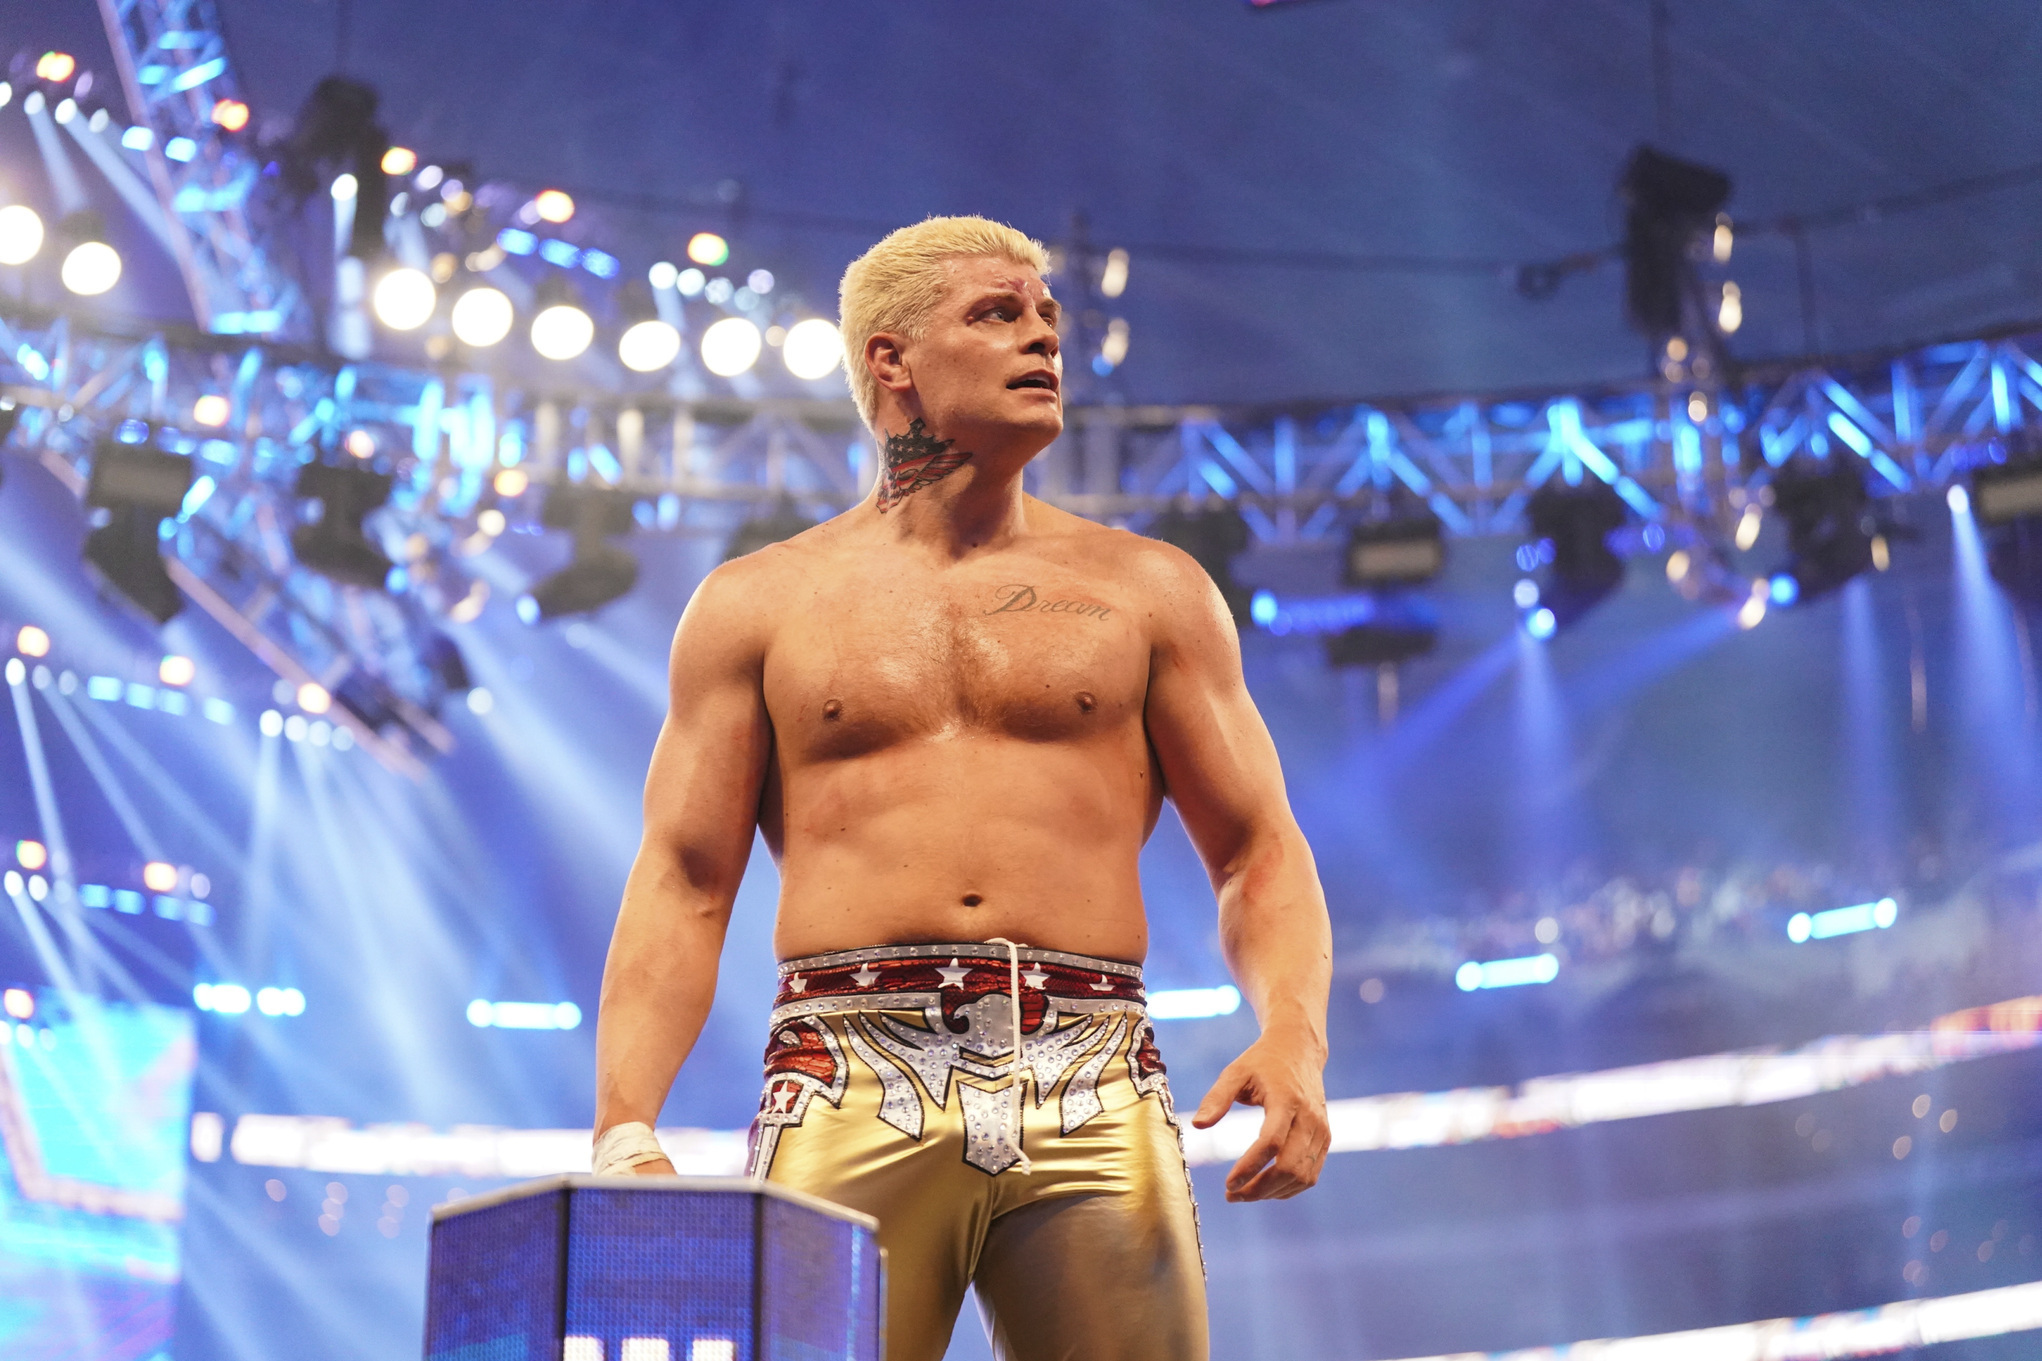 Cody Rhodes stands on the middle rope of the turnbuckle at Wrestlemania 38. He is wearing gold trunks, bleach-blonde hair, staring out at the crowd, head turned to his left.